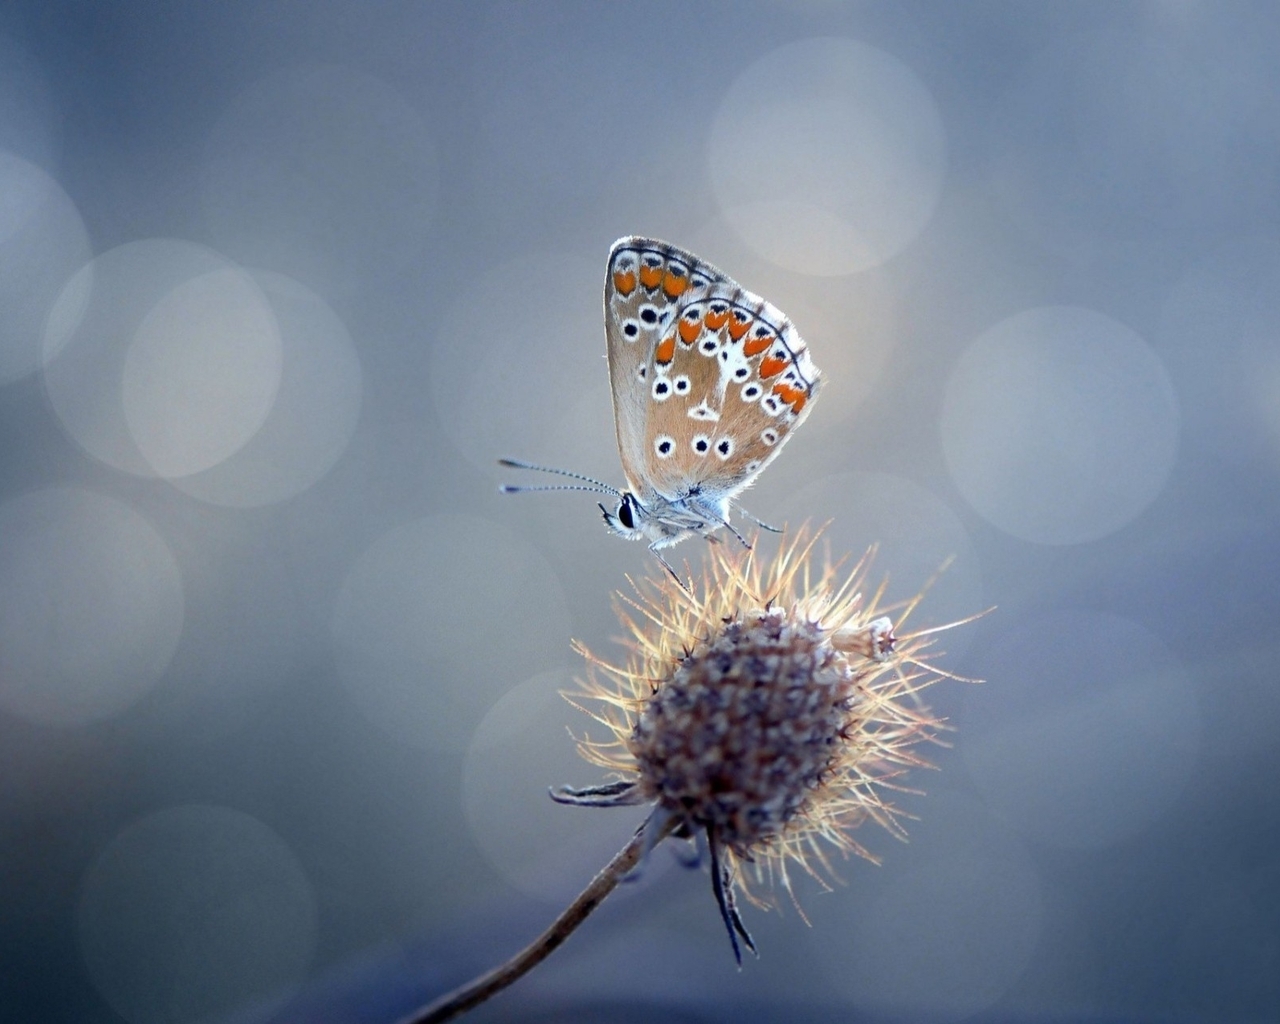 Image: Butterfly, plant, blue head, flares